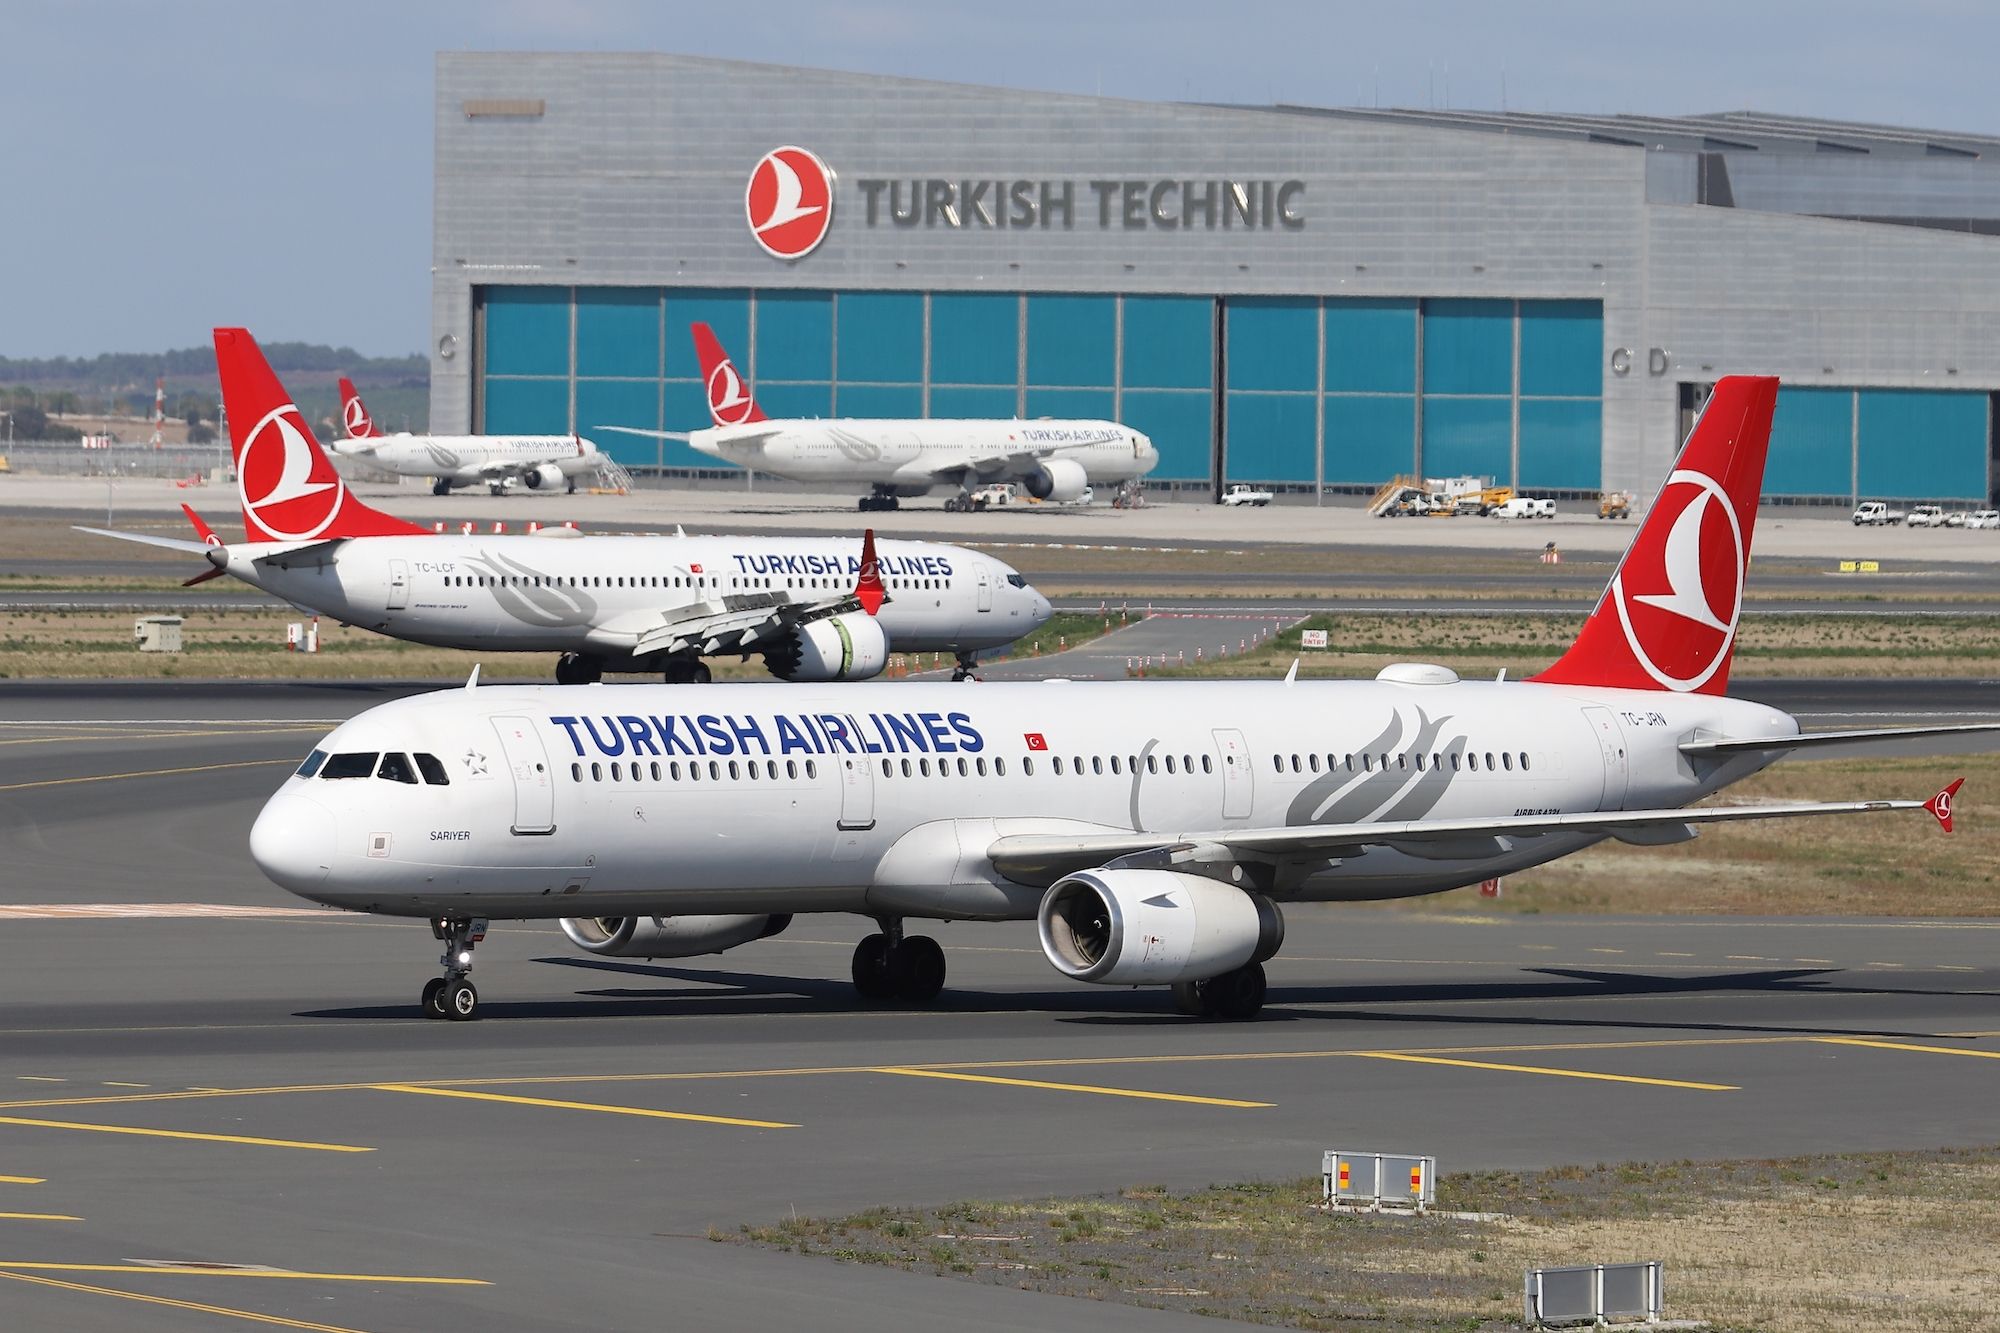 Several Turkish Airlines aircraft on the ground at Istanbul Airport.